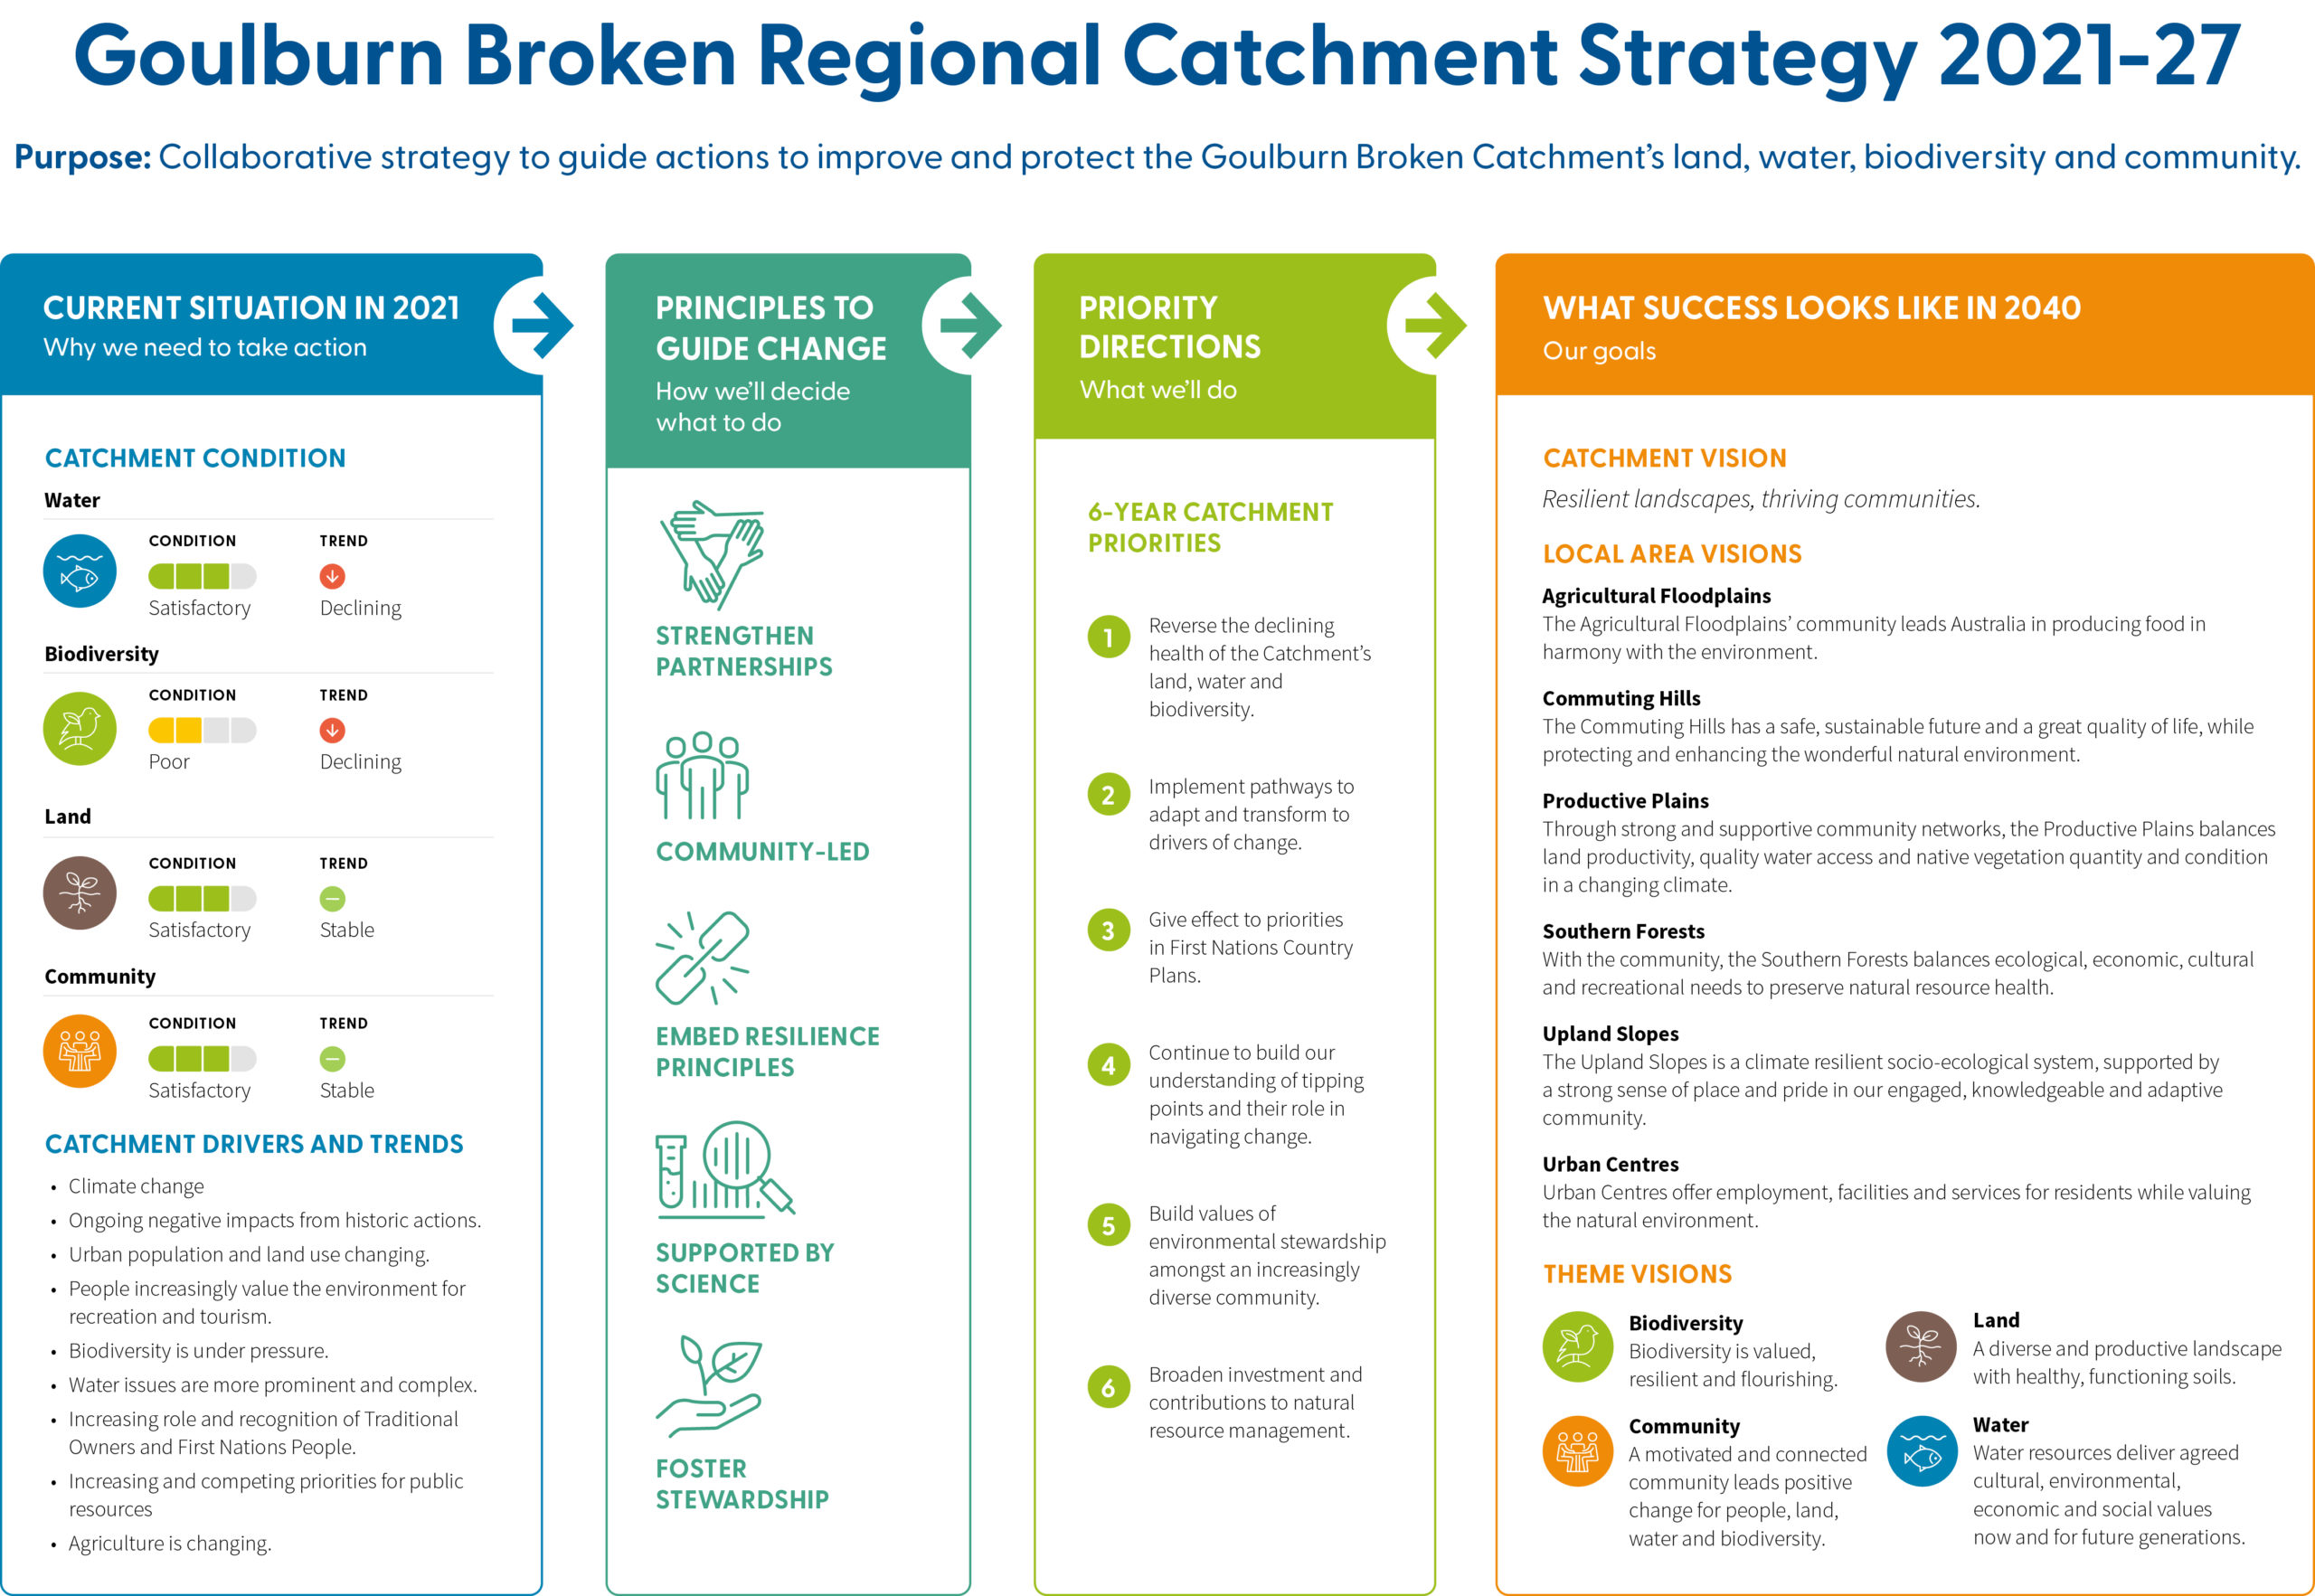 Summary diagram of the Goulburn Broken Regional Catchment Strategy describing four key areas: current situation in 2021 (why we need to take action), principles to guide change (how we'll decide what to do), priority directions (what we'll do) and what success looks like in 2040 (our goals). The content is described in the information below the diagram.